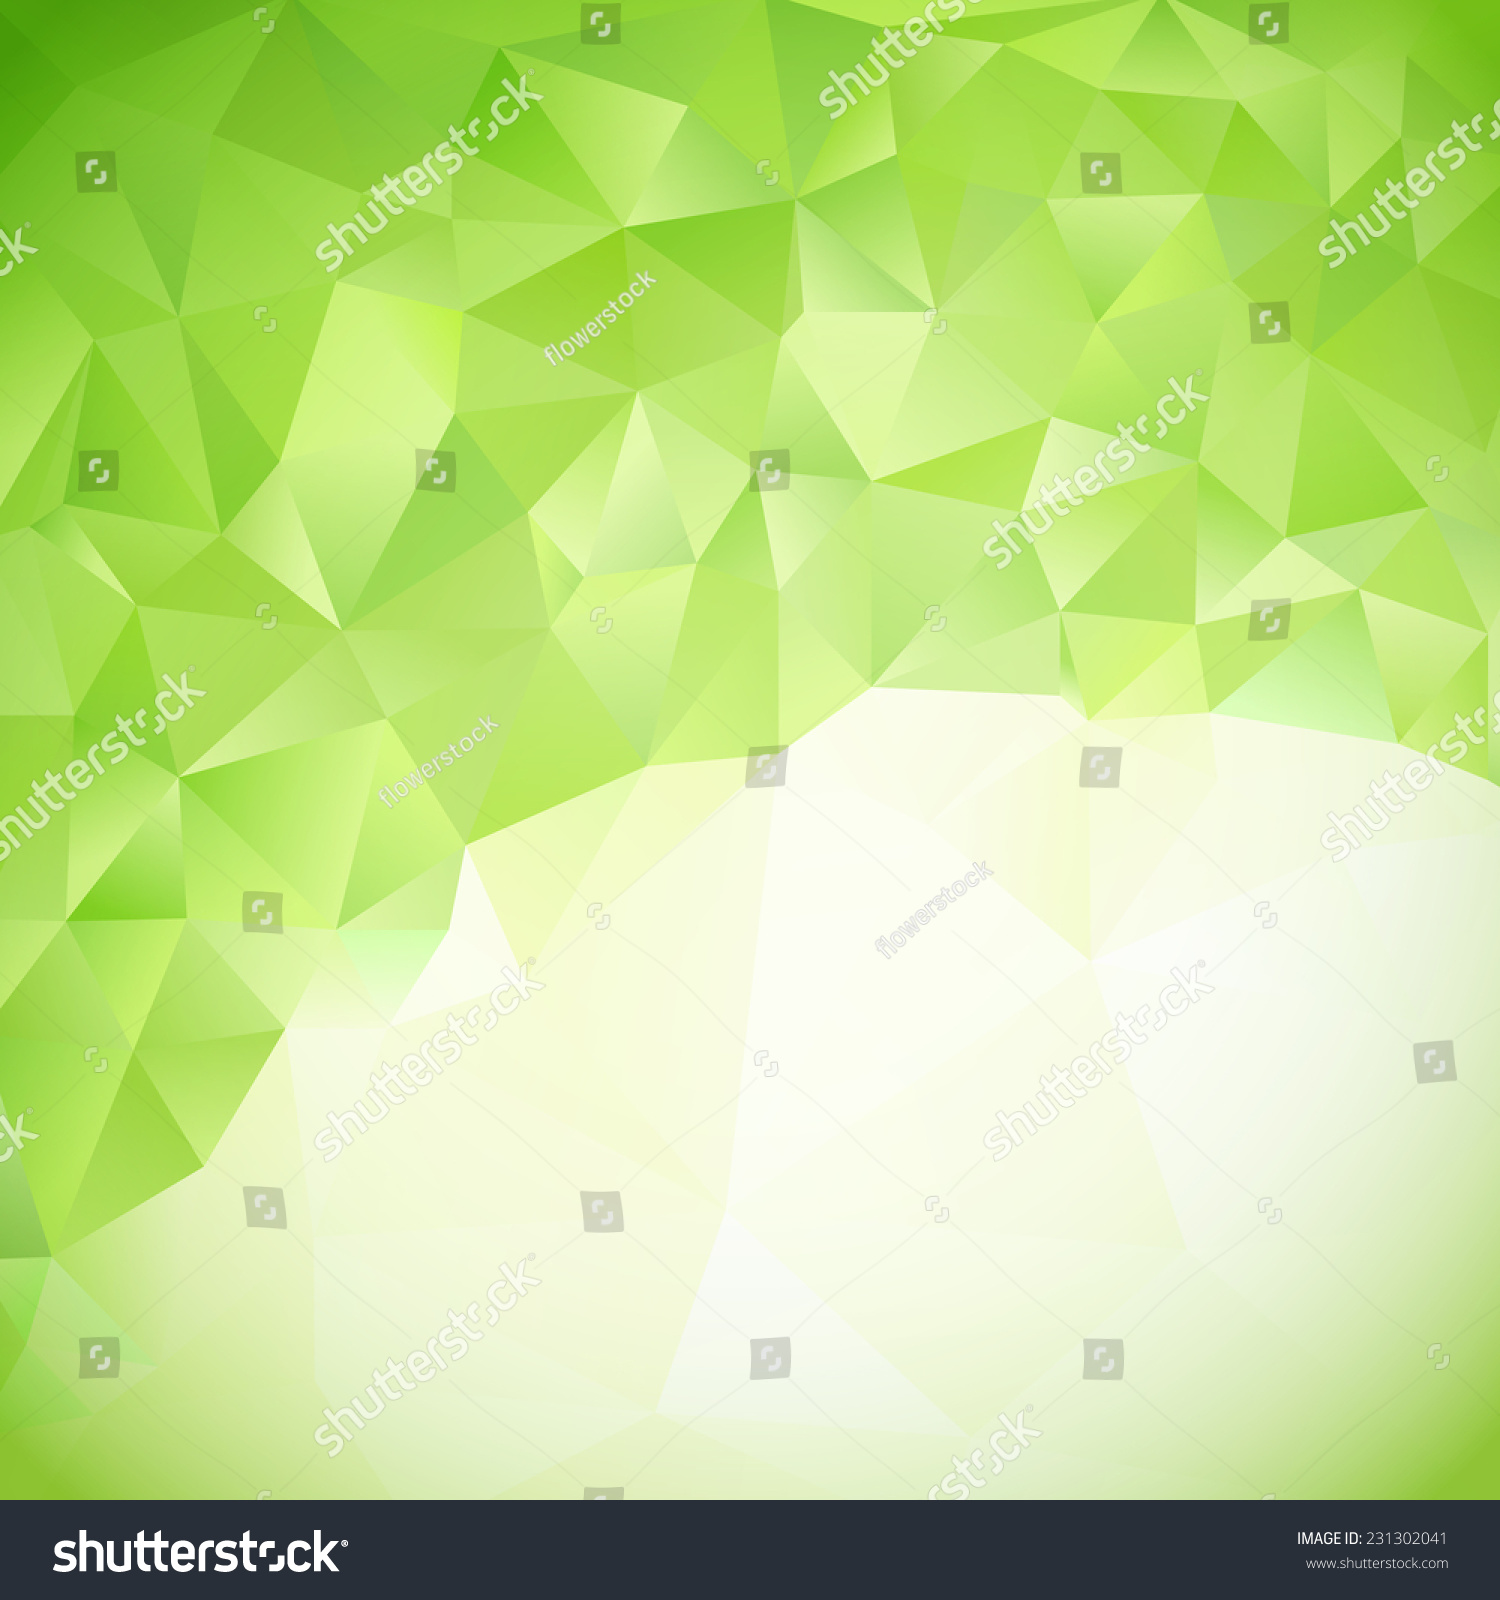 Abstract Green Background With Polygonal Design Stock Vector